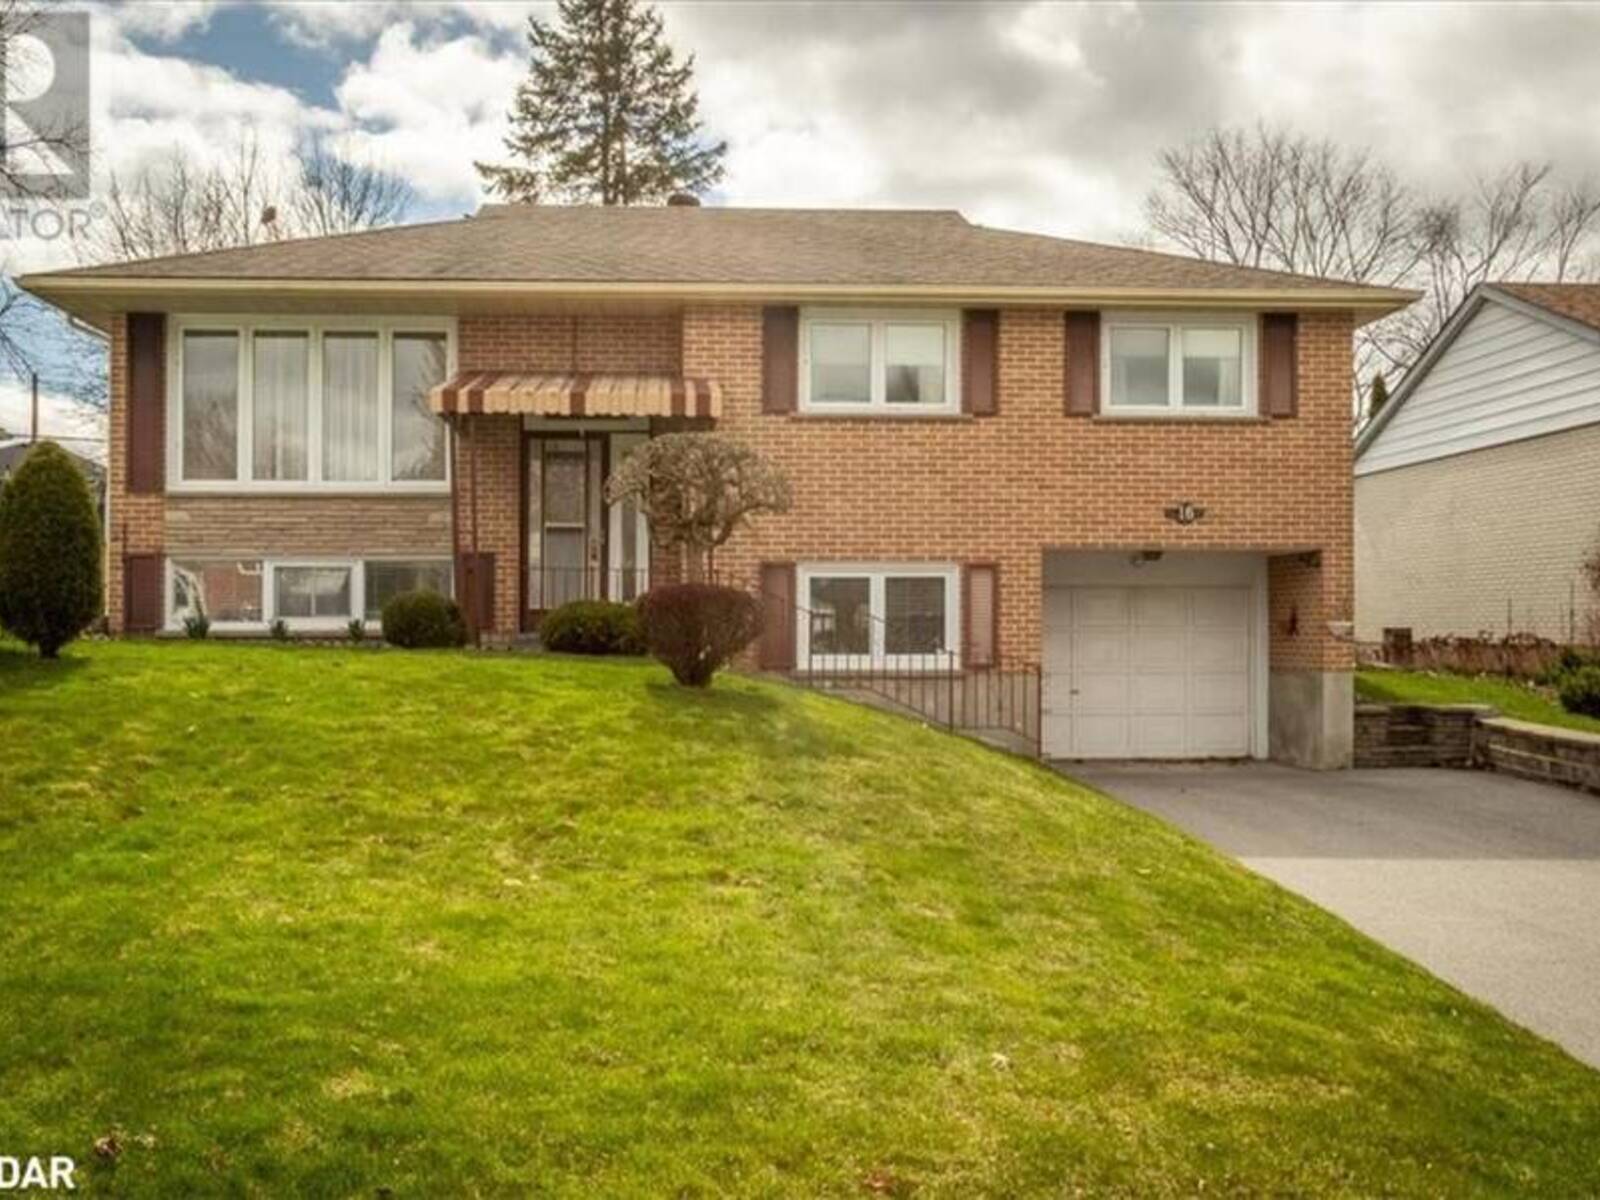 16 LAY Street, Barrie, Ontario L4M 4A7